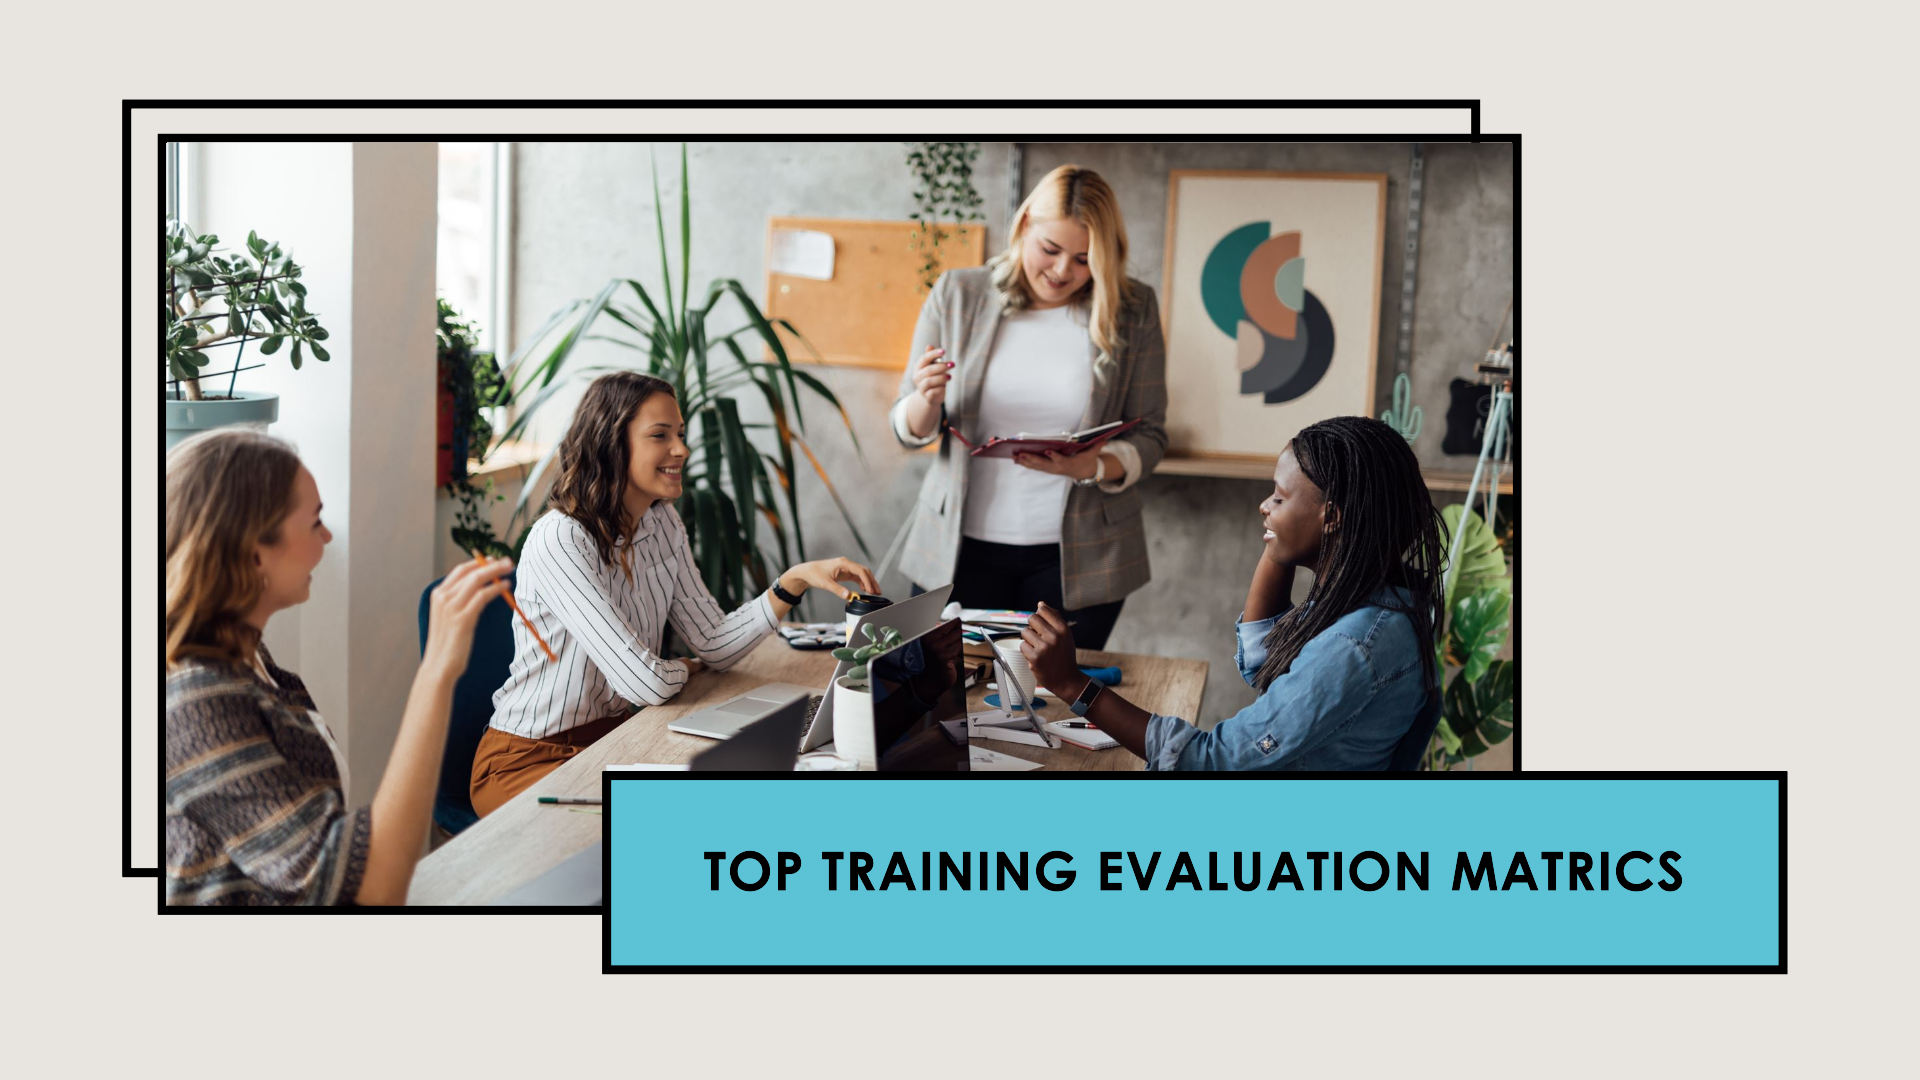 7 Most Common training evaluation metrics used to measure employee engagement in corporate training programs